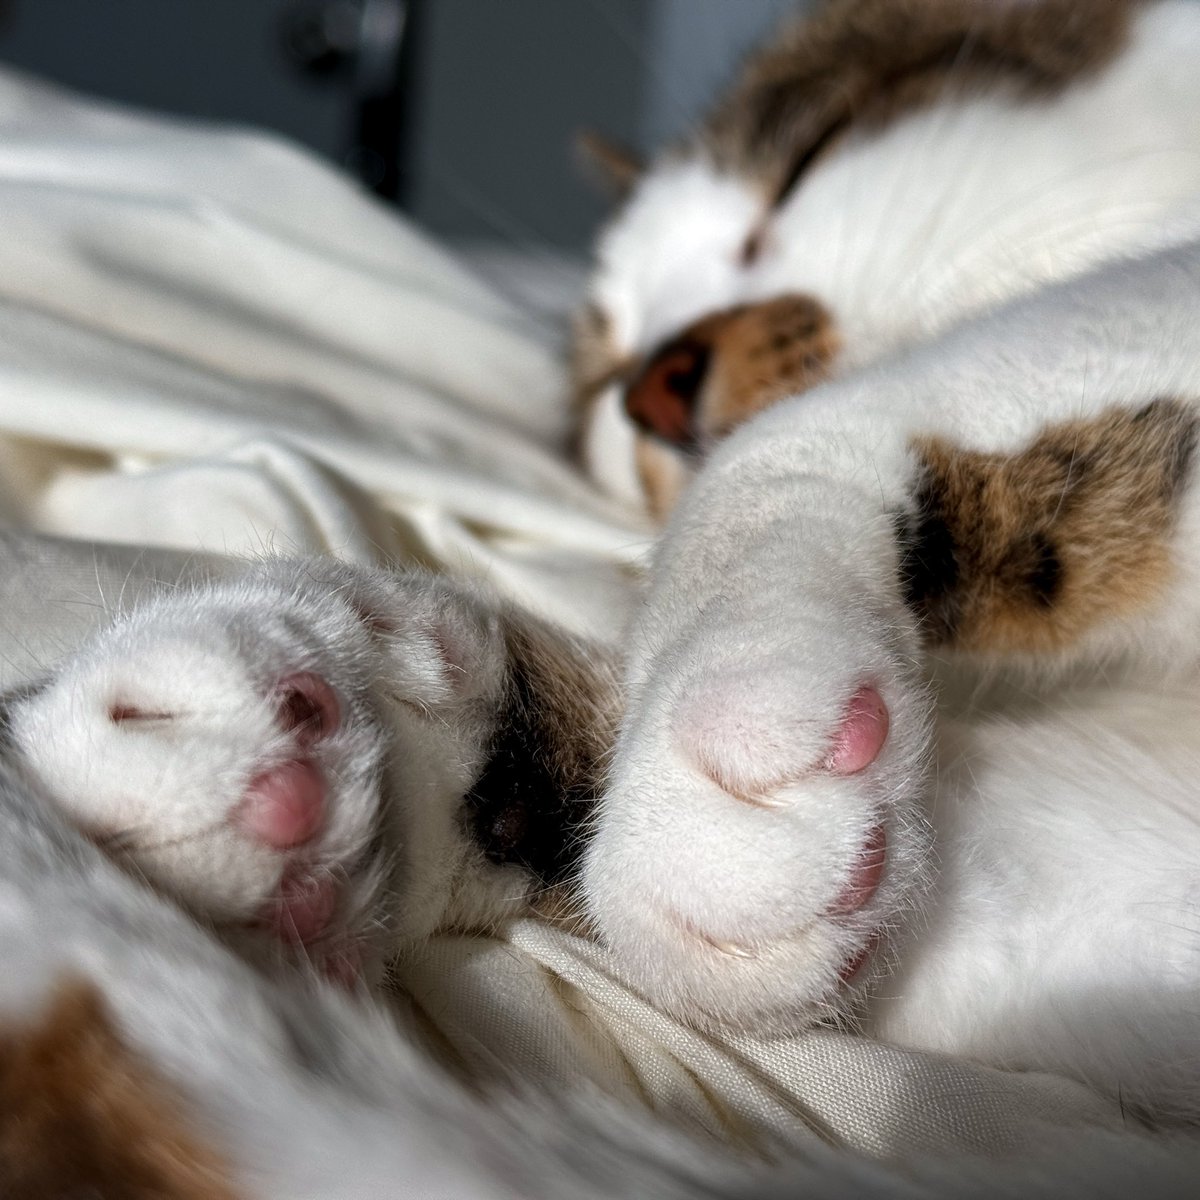 One of the best times to peep some toe beans is when the animal is slumbering 🐾
#ToeBeanTuesday #cat #ToeBeans